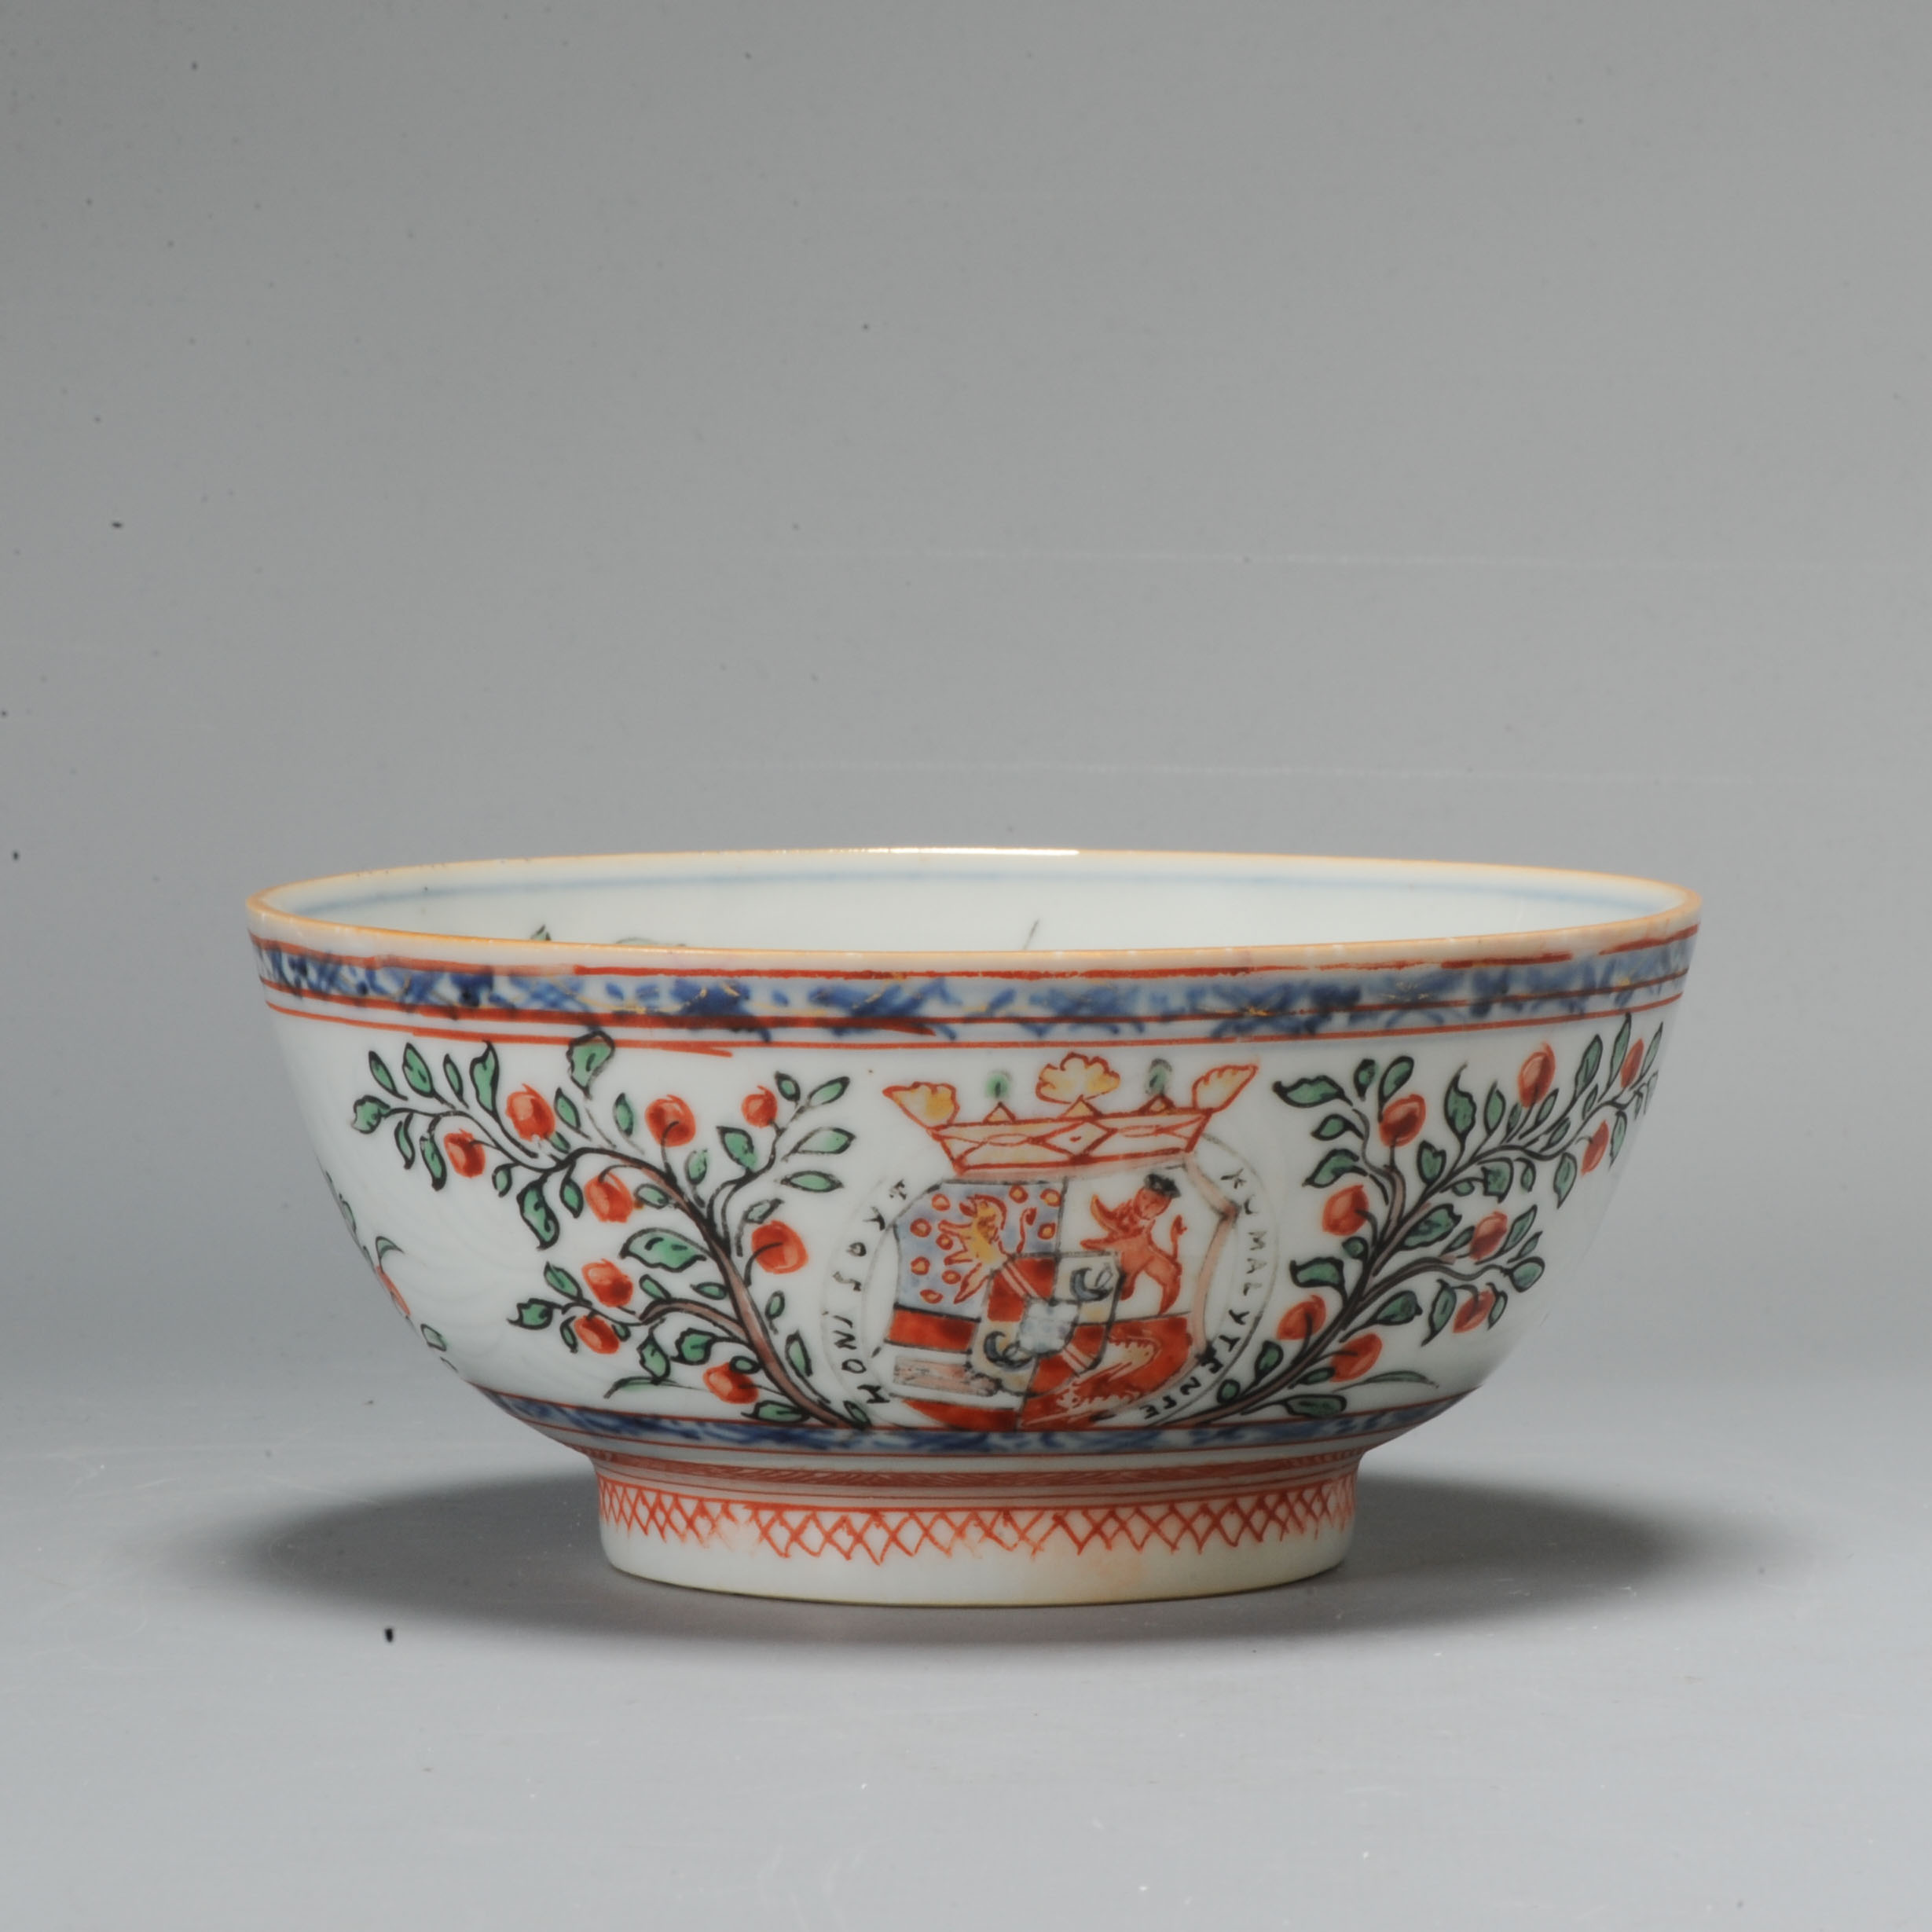 1039 Order of the Garter 1733 Antique Chinese Porcelain bow Decorated in Europe. Amsterdam Bont